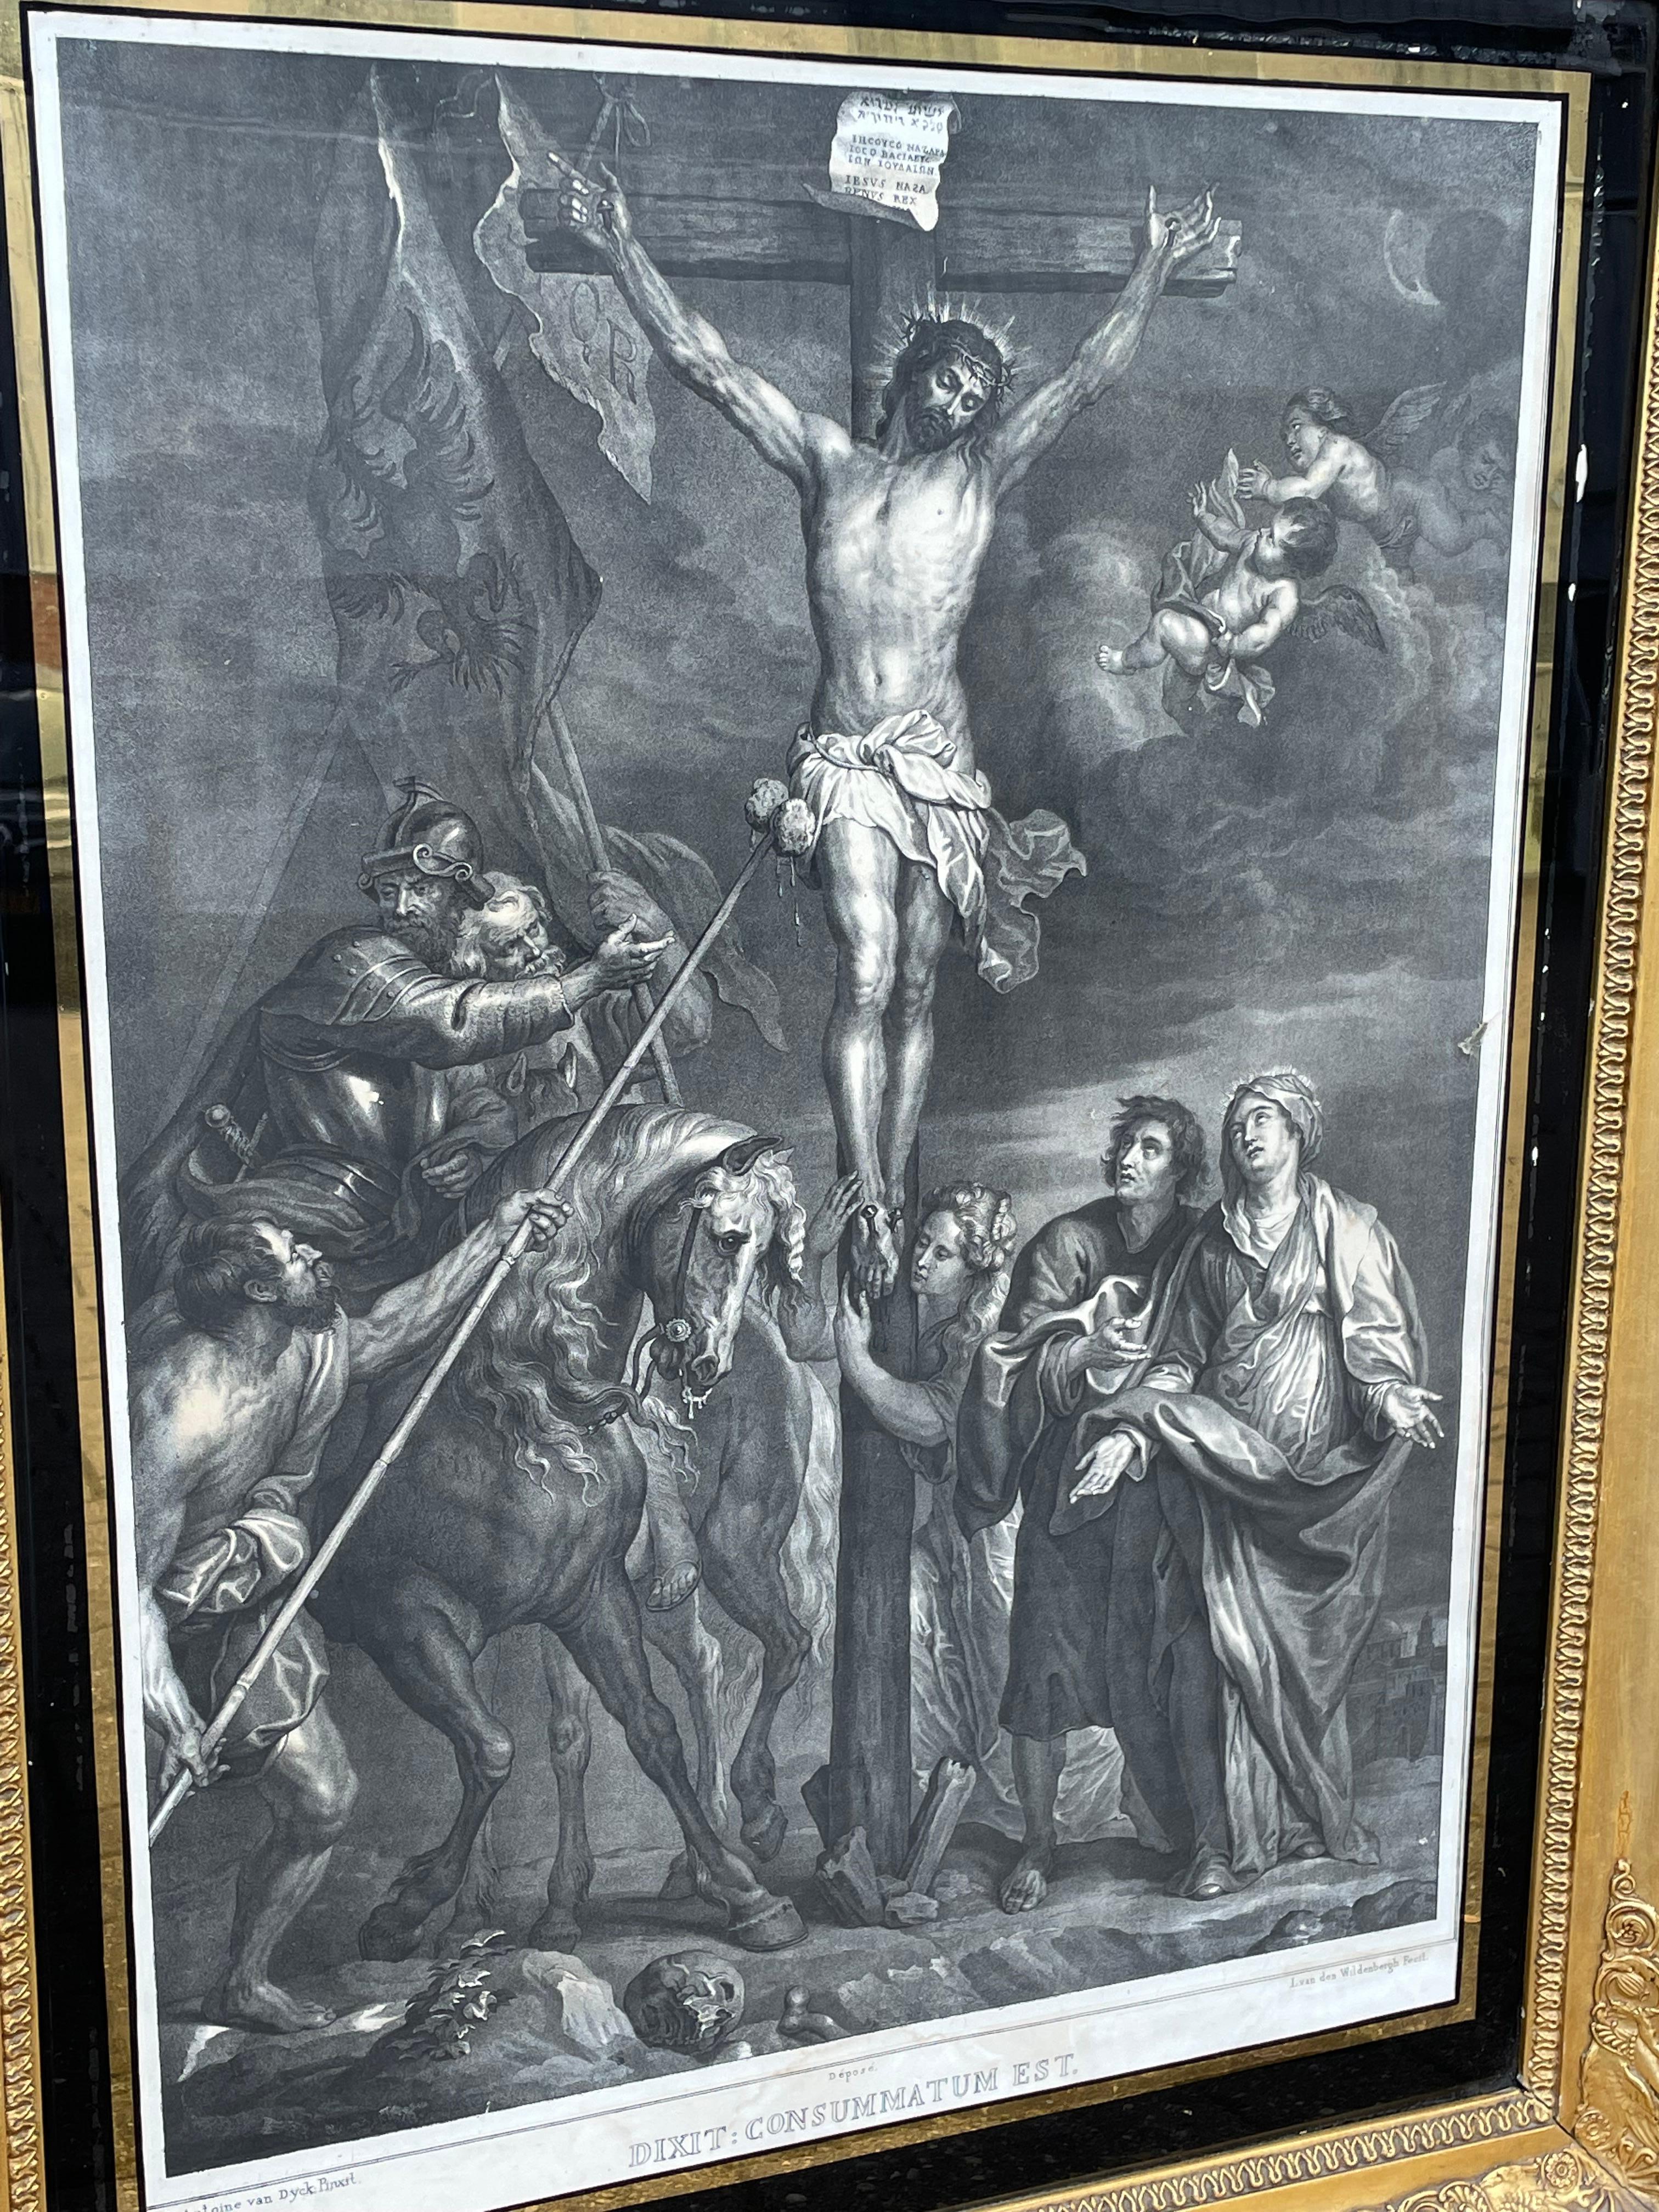 Amazing lithograph of a 1630 van Dyck painting by lithographer L. van den Wildenbergh (1803-1857).

The original painting of this rare antique lithograph (in its original early 19th century frame) is by worldfamous Flemish Baroc artist / painter